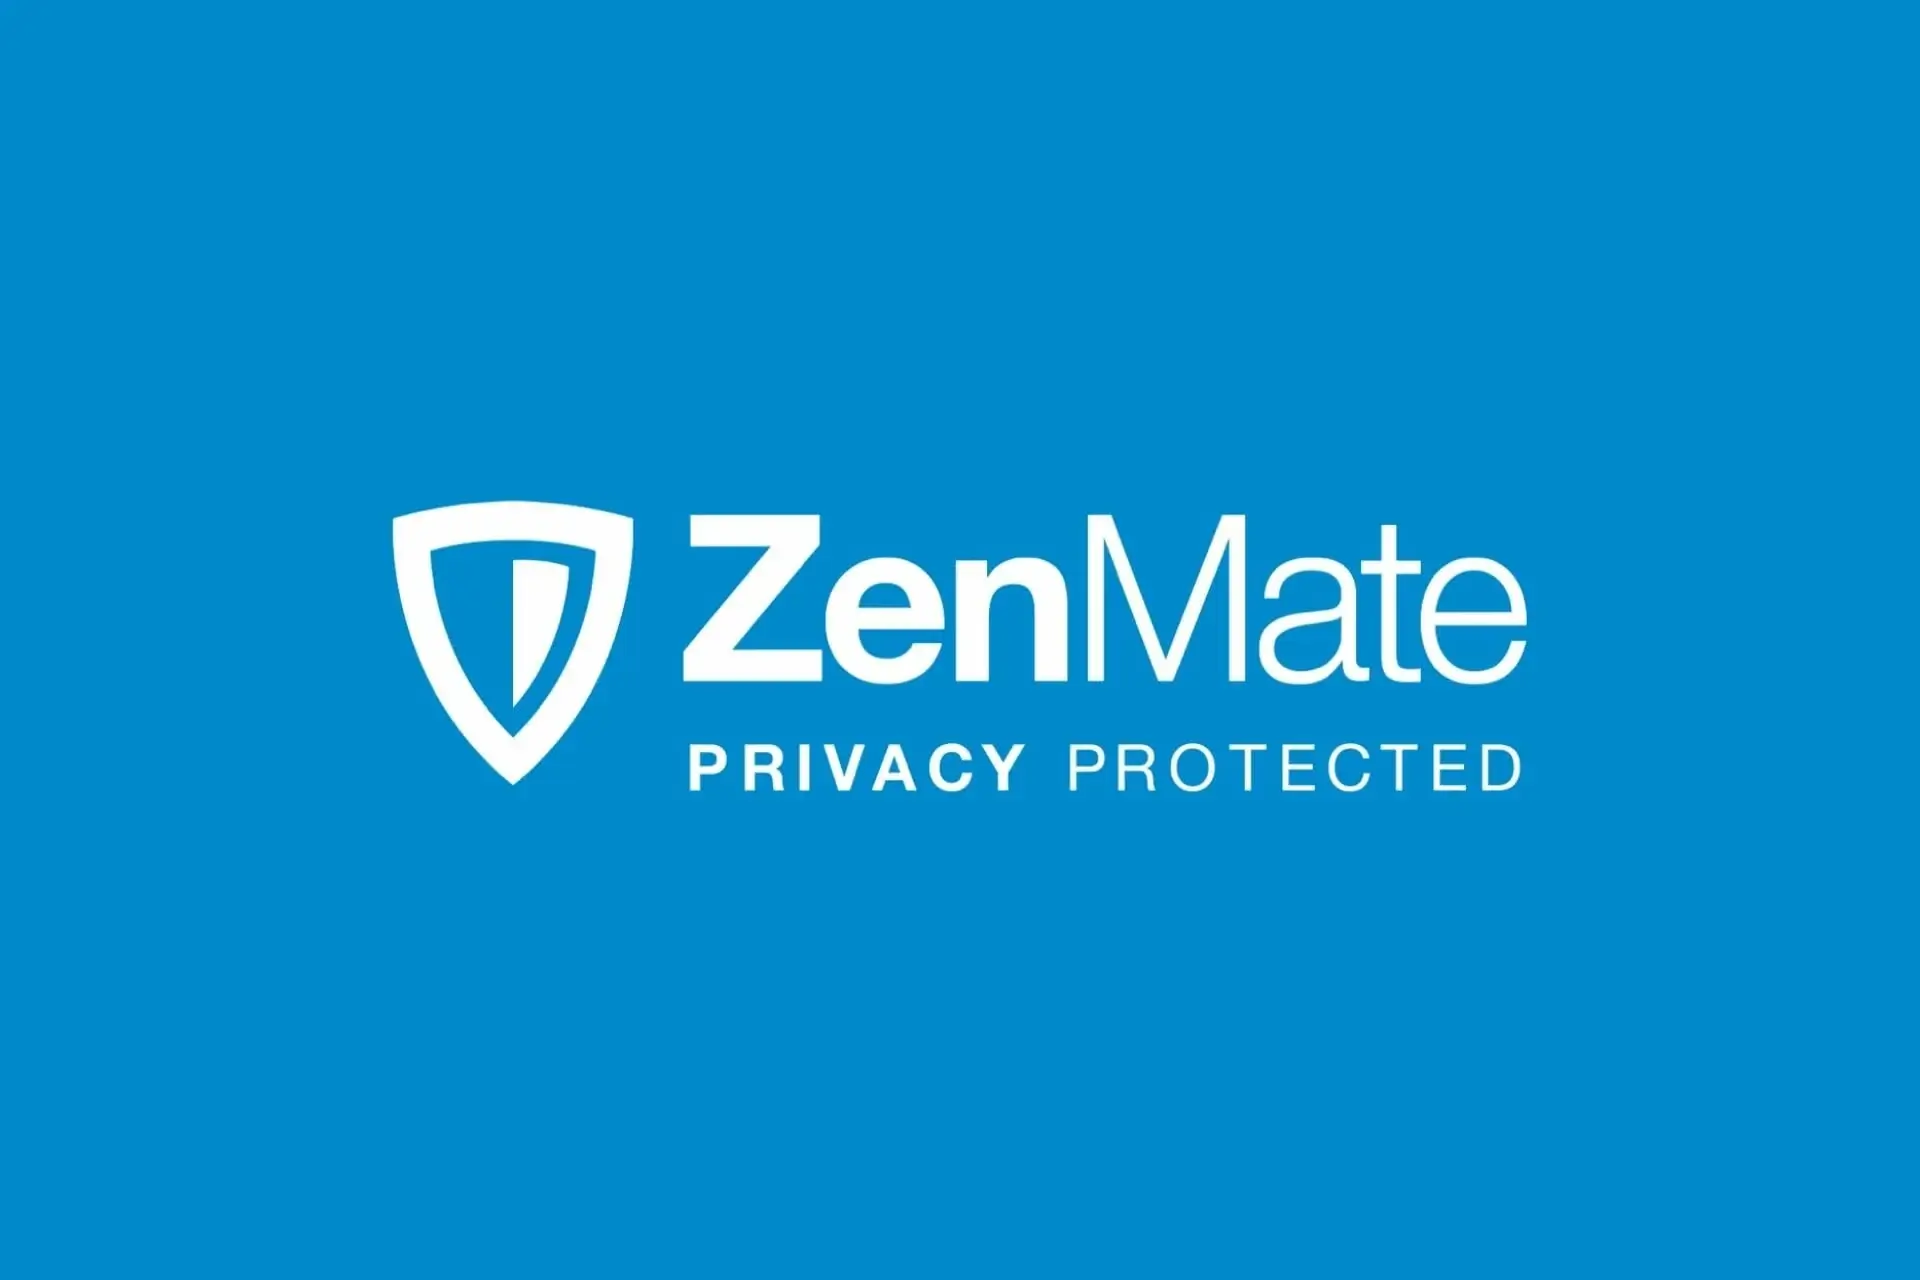 ZenMate Users Migrate to CyberGhost Under Kape Technologies Ownership